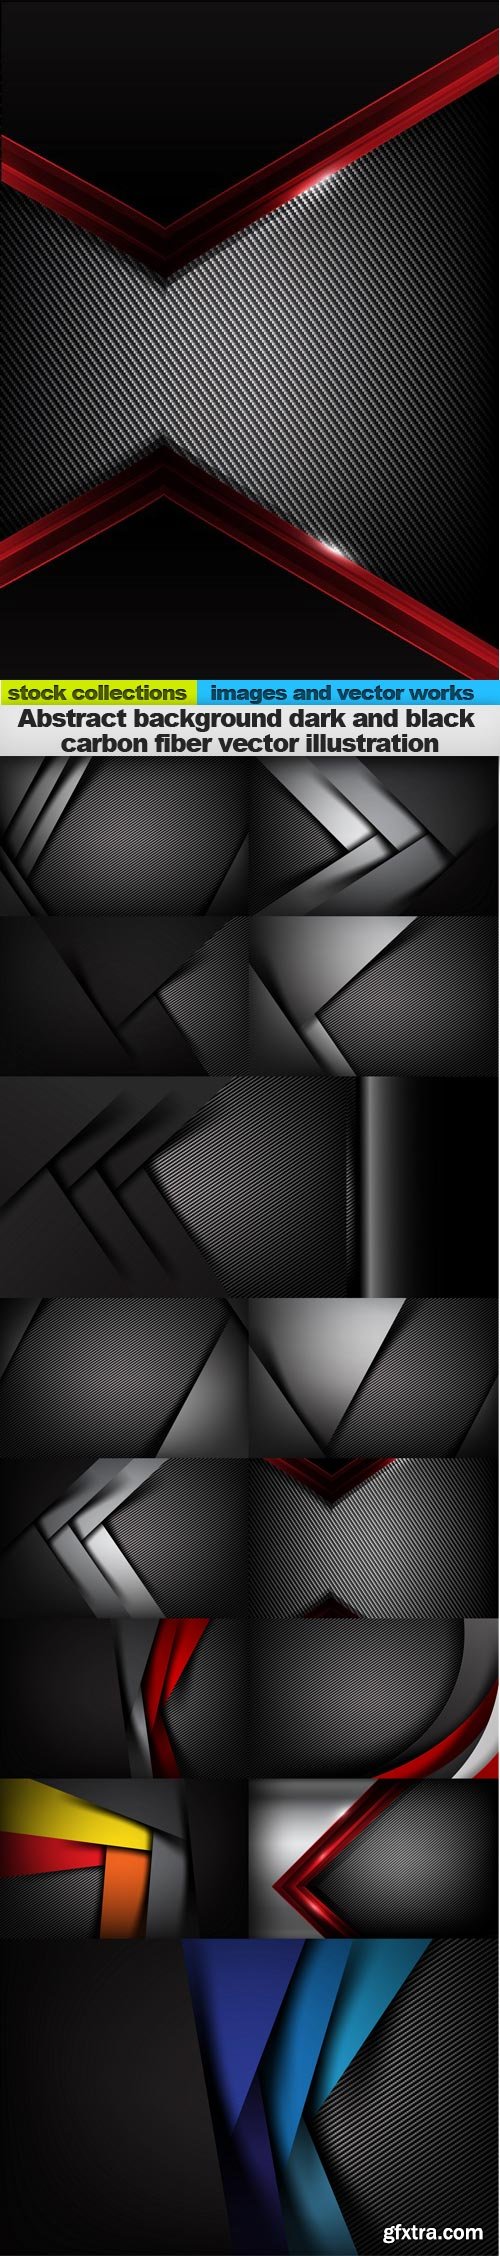 Abstract background dark and black carbon fiber vector illustration 1, 15 x EPS